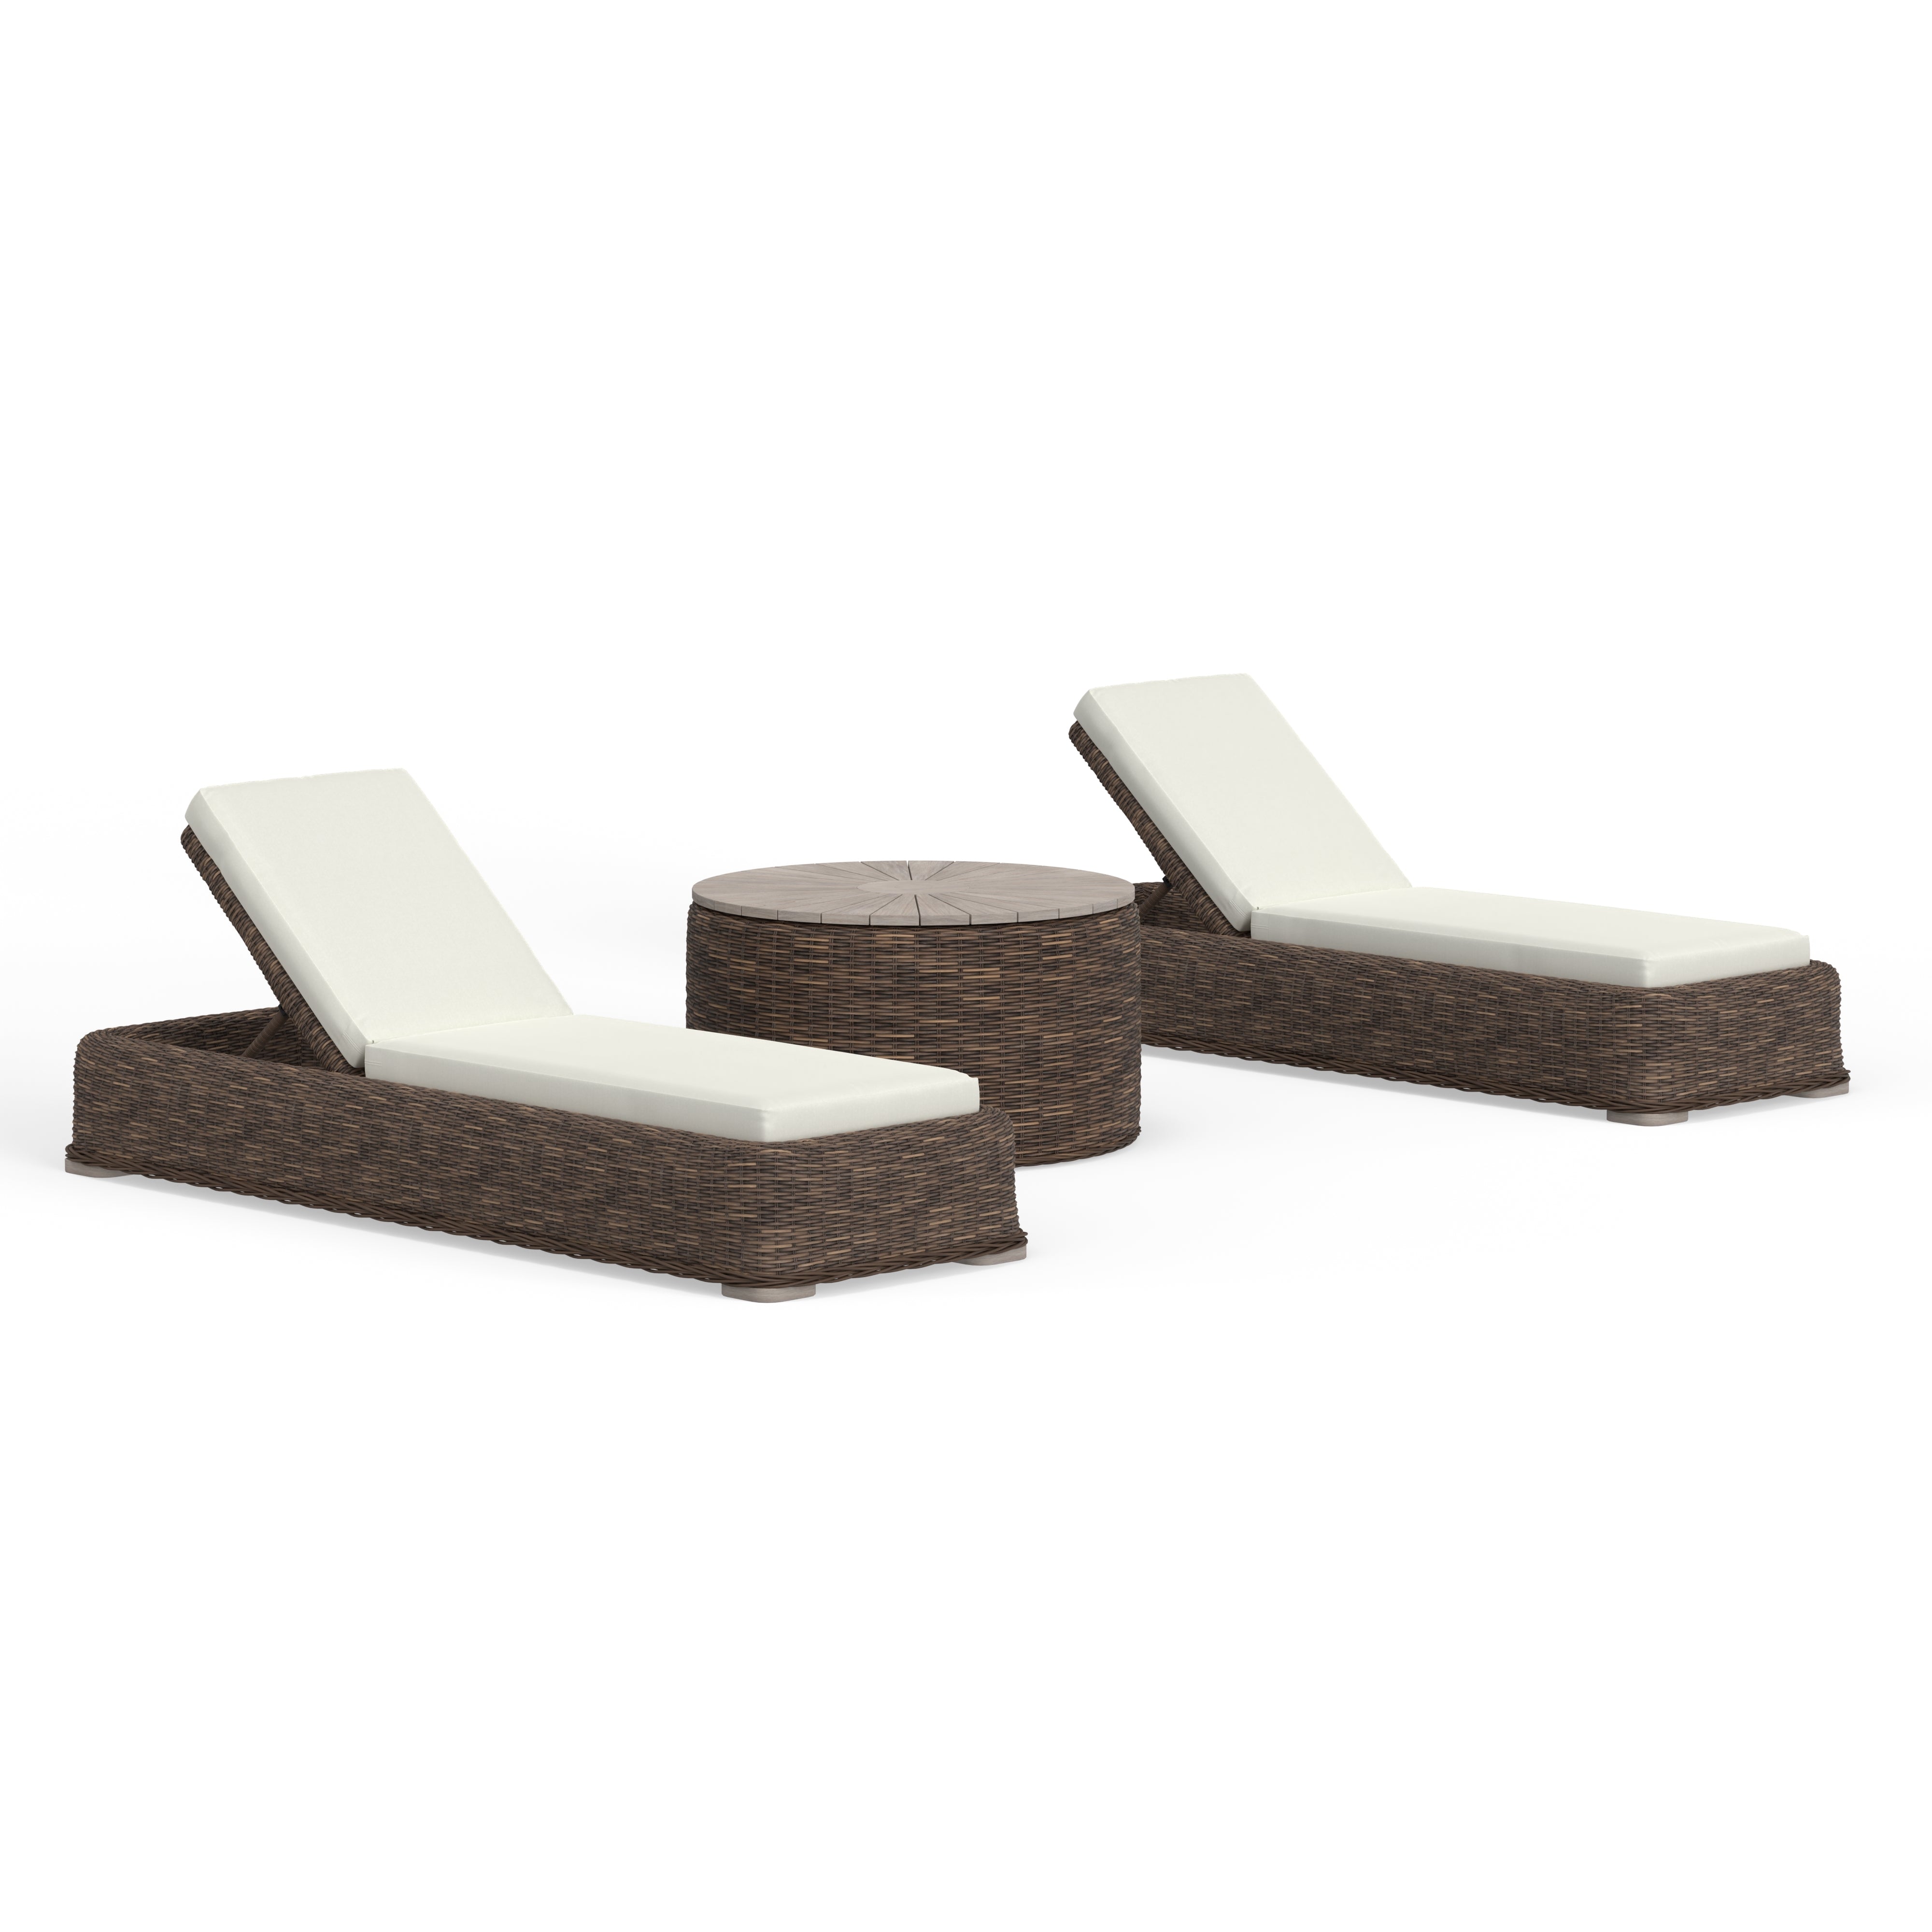 Quality Wicker Chaise Lounger For Poolside